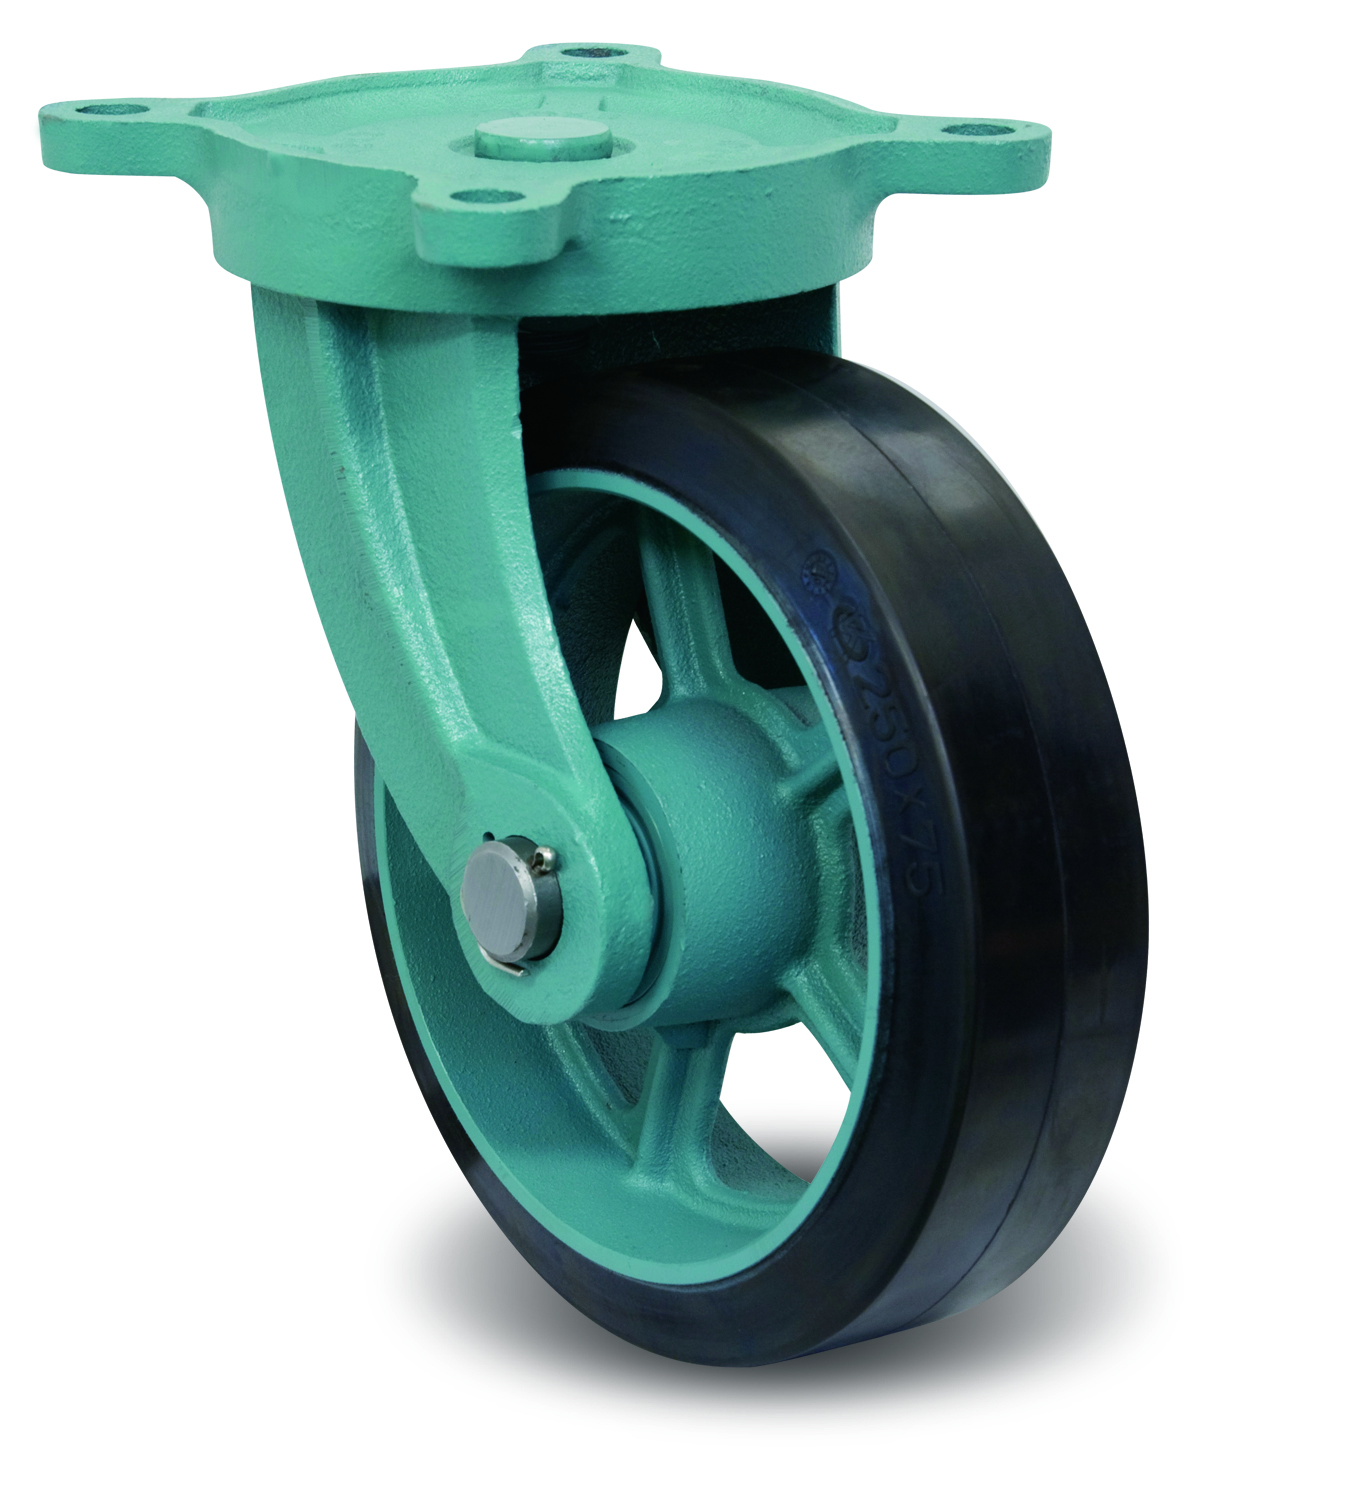 Casters - Rubber with Ductile Steel Swivel Plate, MG-O Series with Bracket, E/MG-O Series. EMG-O200X75